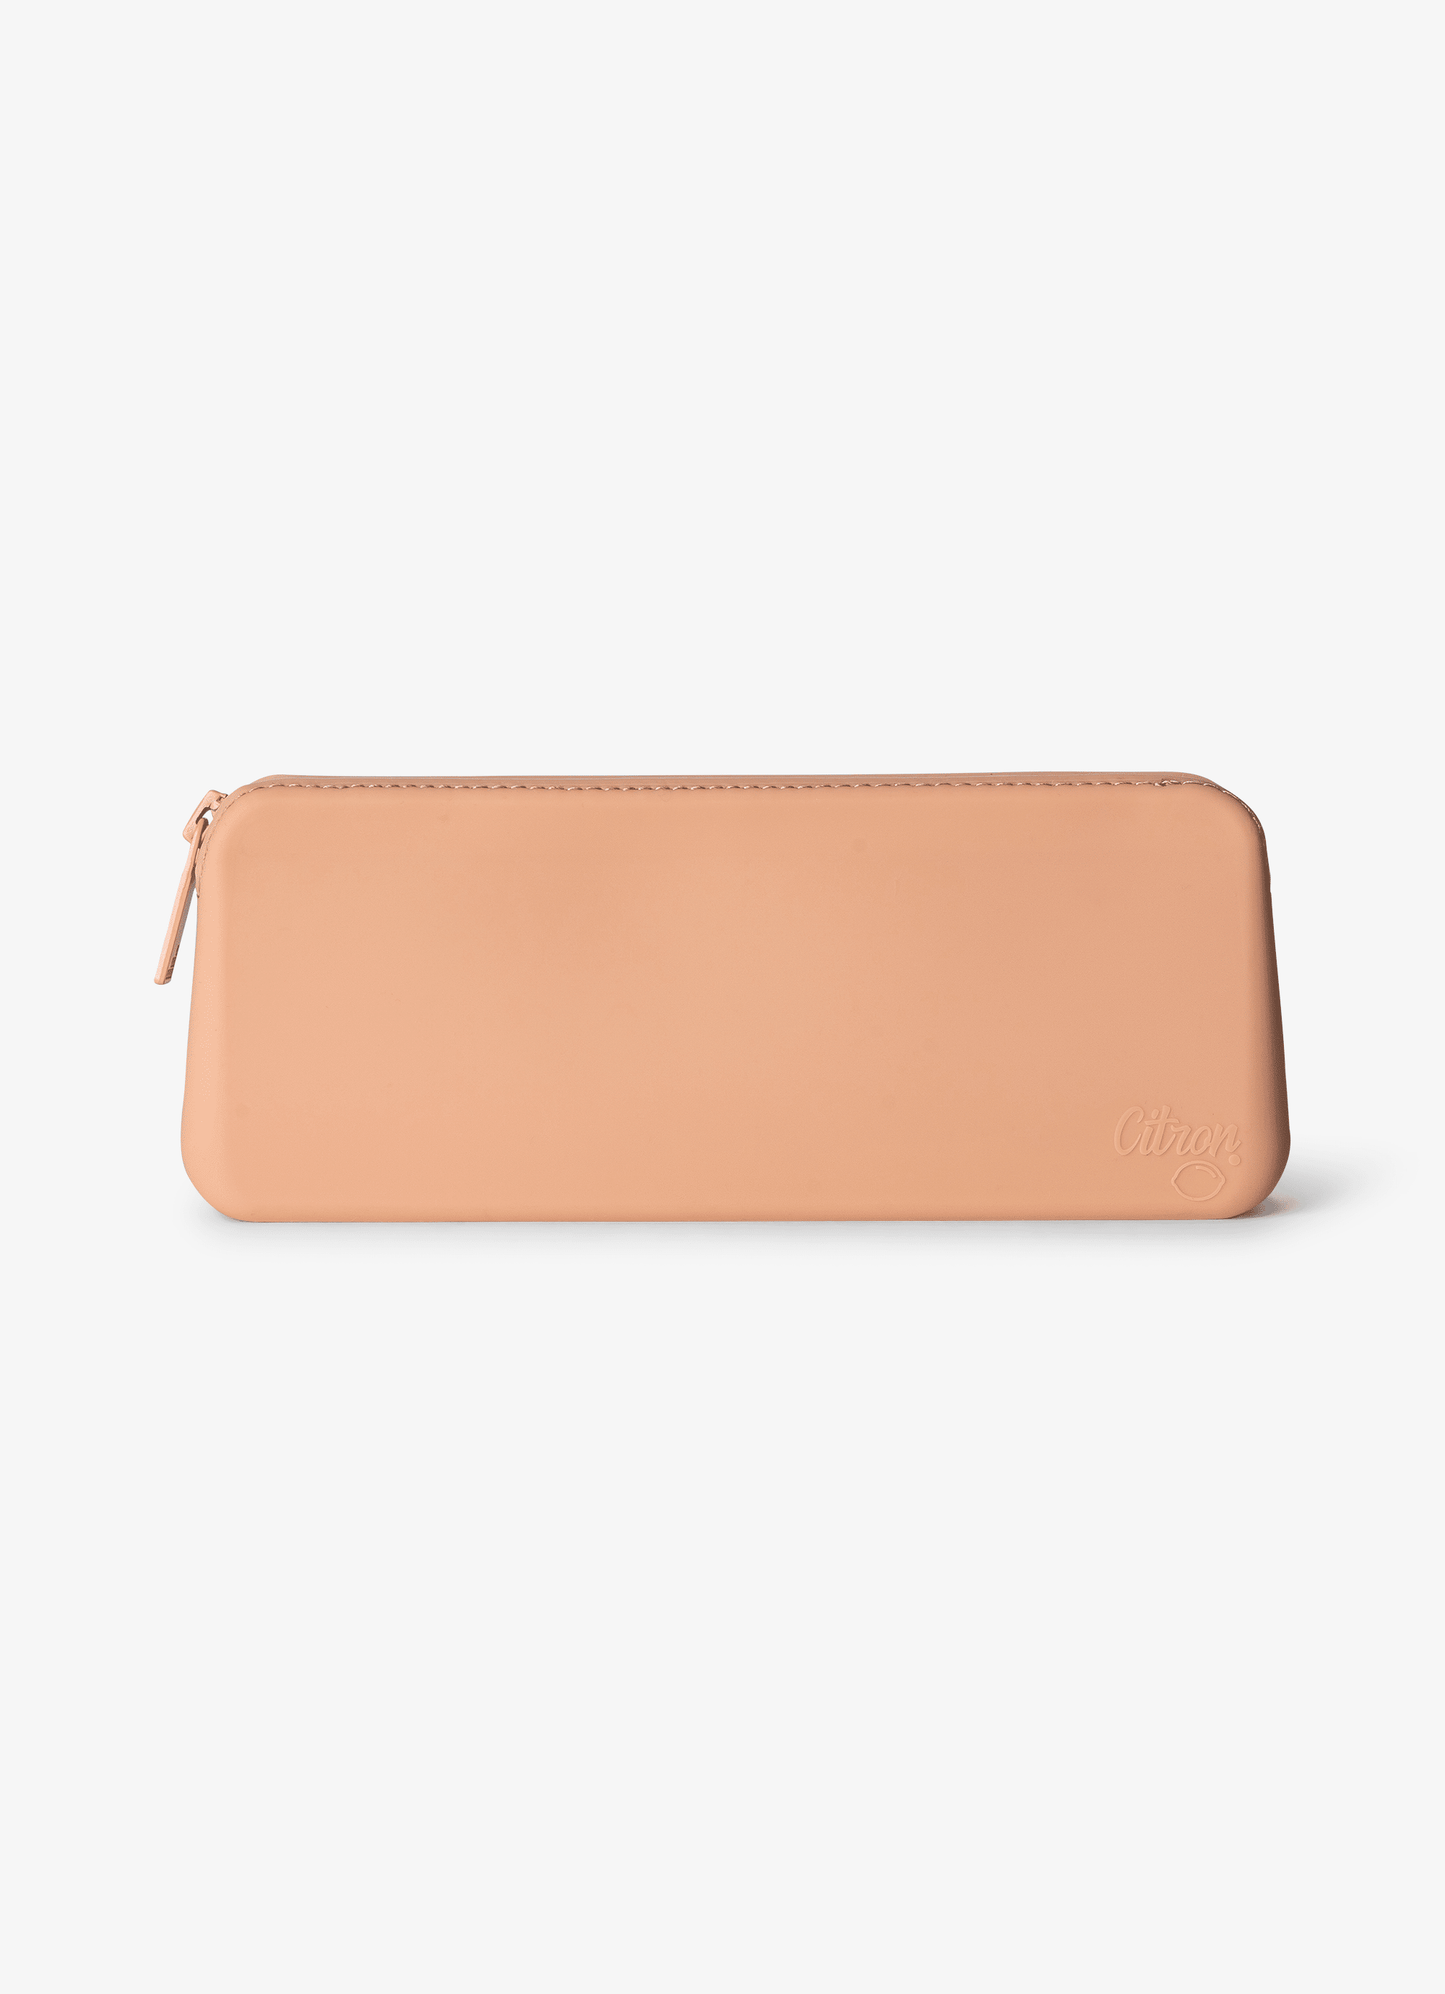 Silicone Cutlery Pouch - Blush Pink